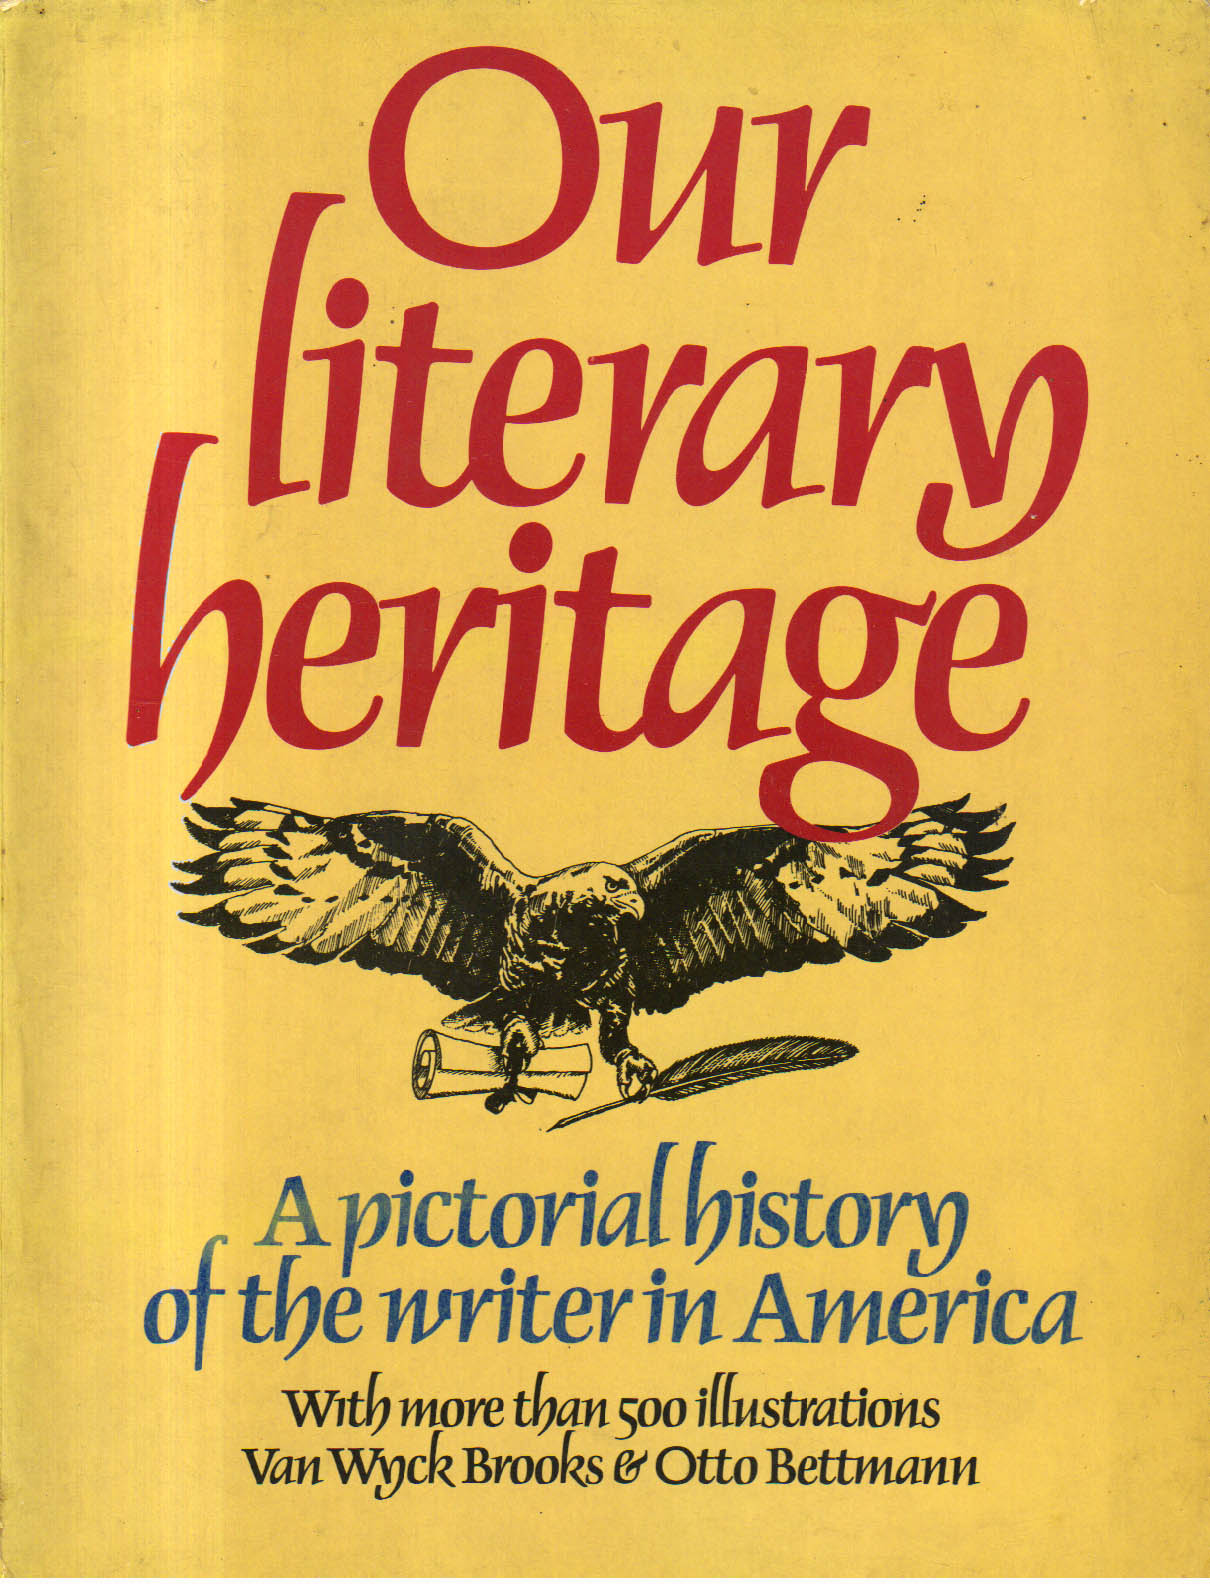 Our literary heritage: A pictorial history of the writer in America